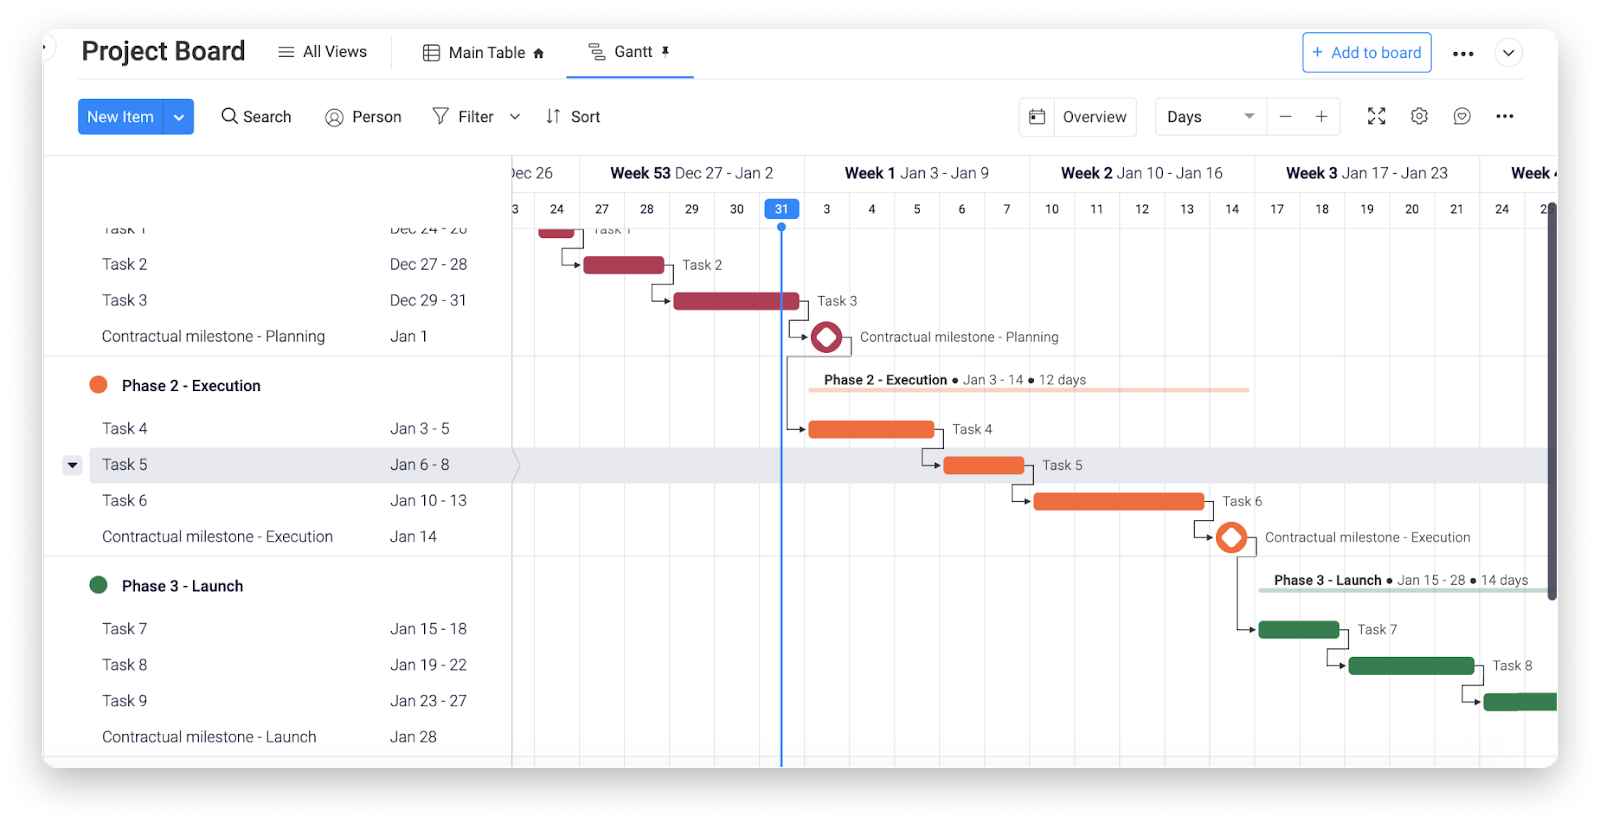 Every project follows some sort of schedule and monday.com provides the Gantt chart to keep tabs on all of your tasks at a high level.